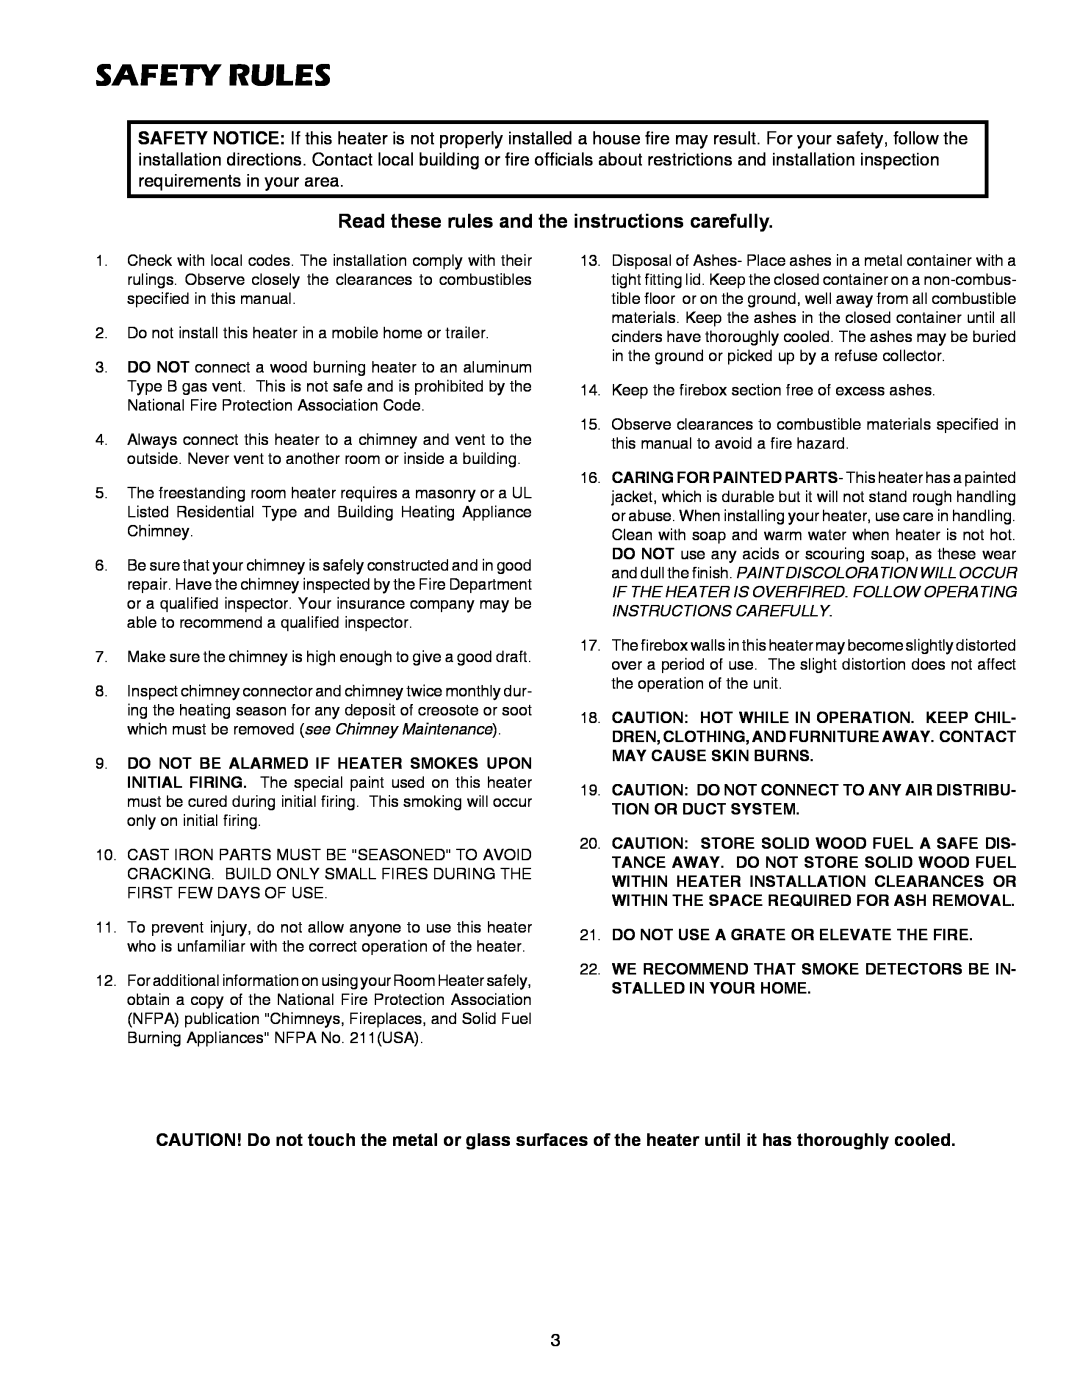 United States Stove 2007B owner manual safety rules, Read these rules and the instructions carefully 